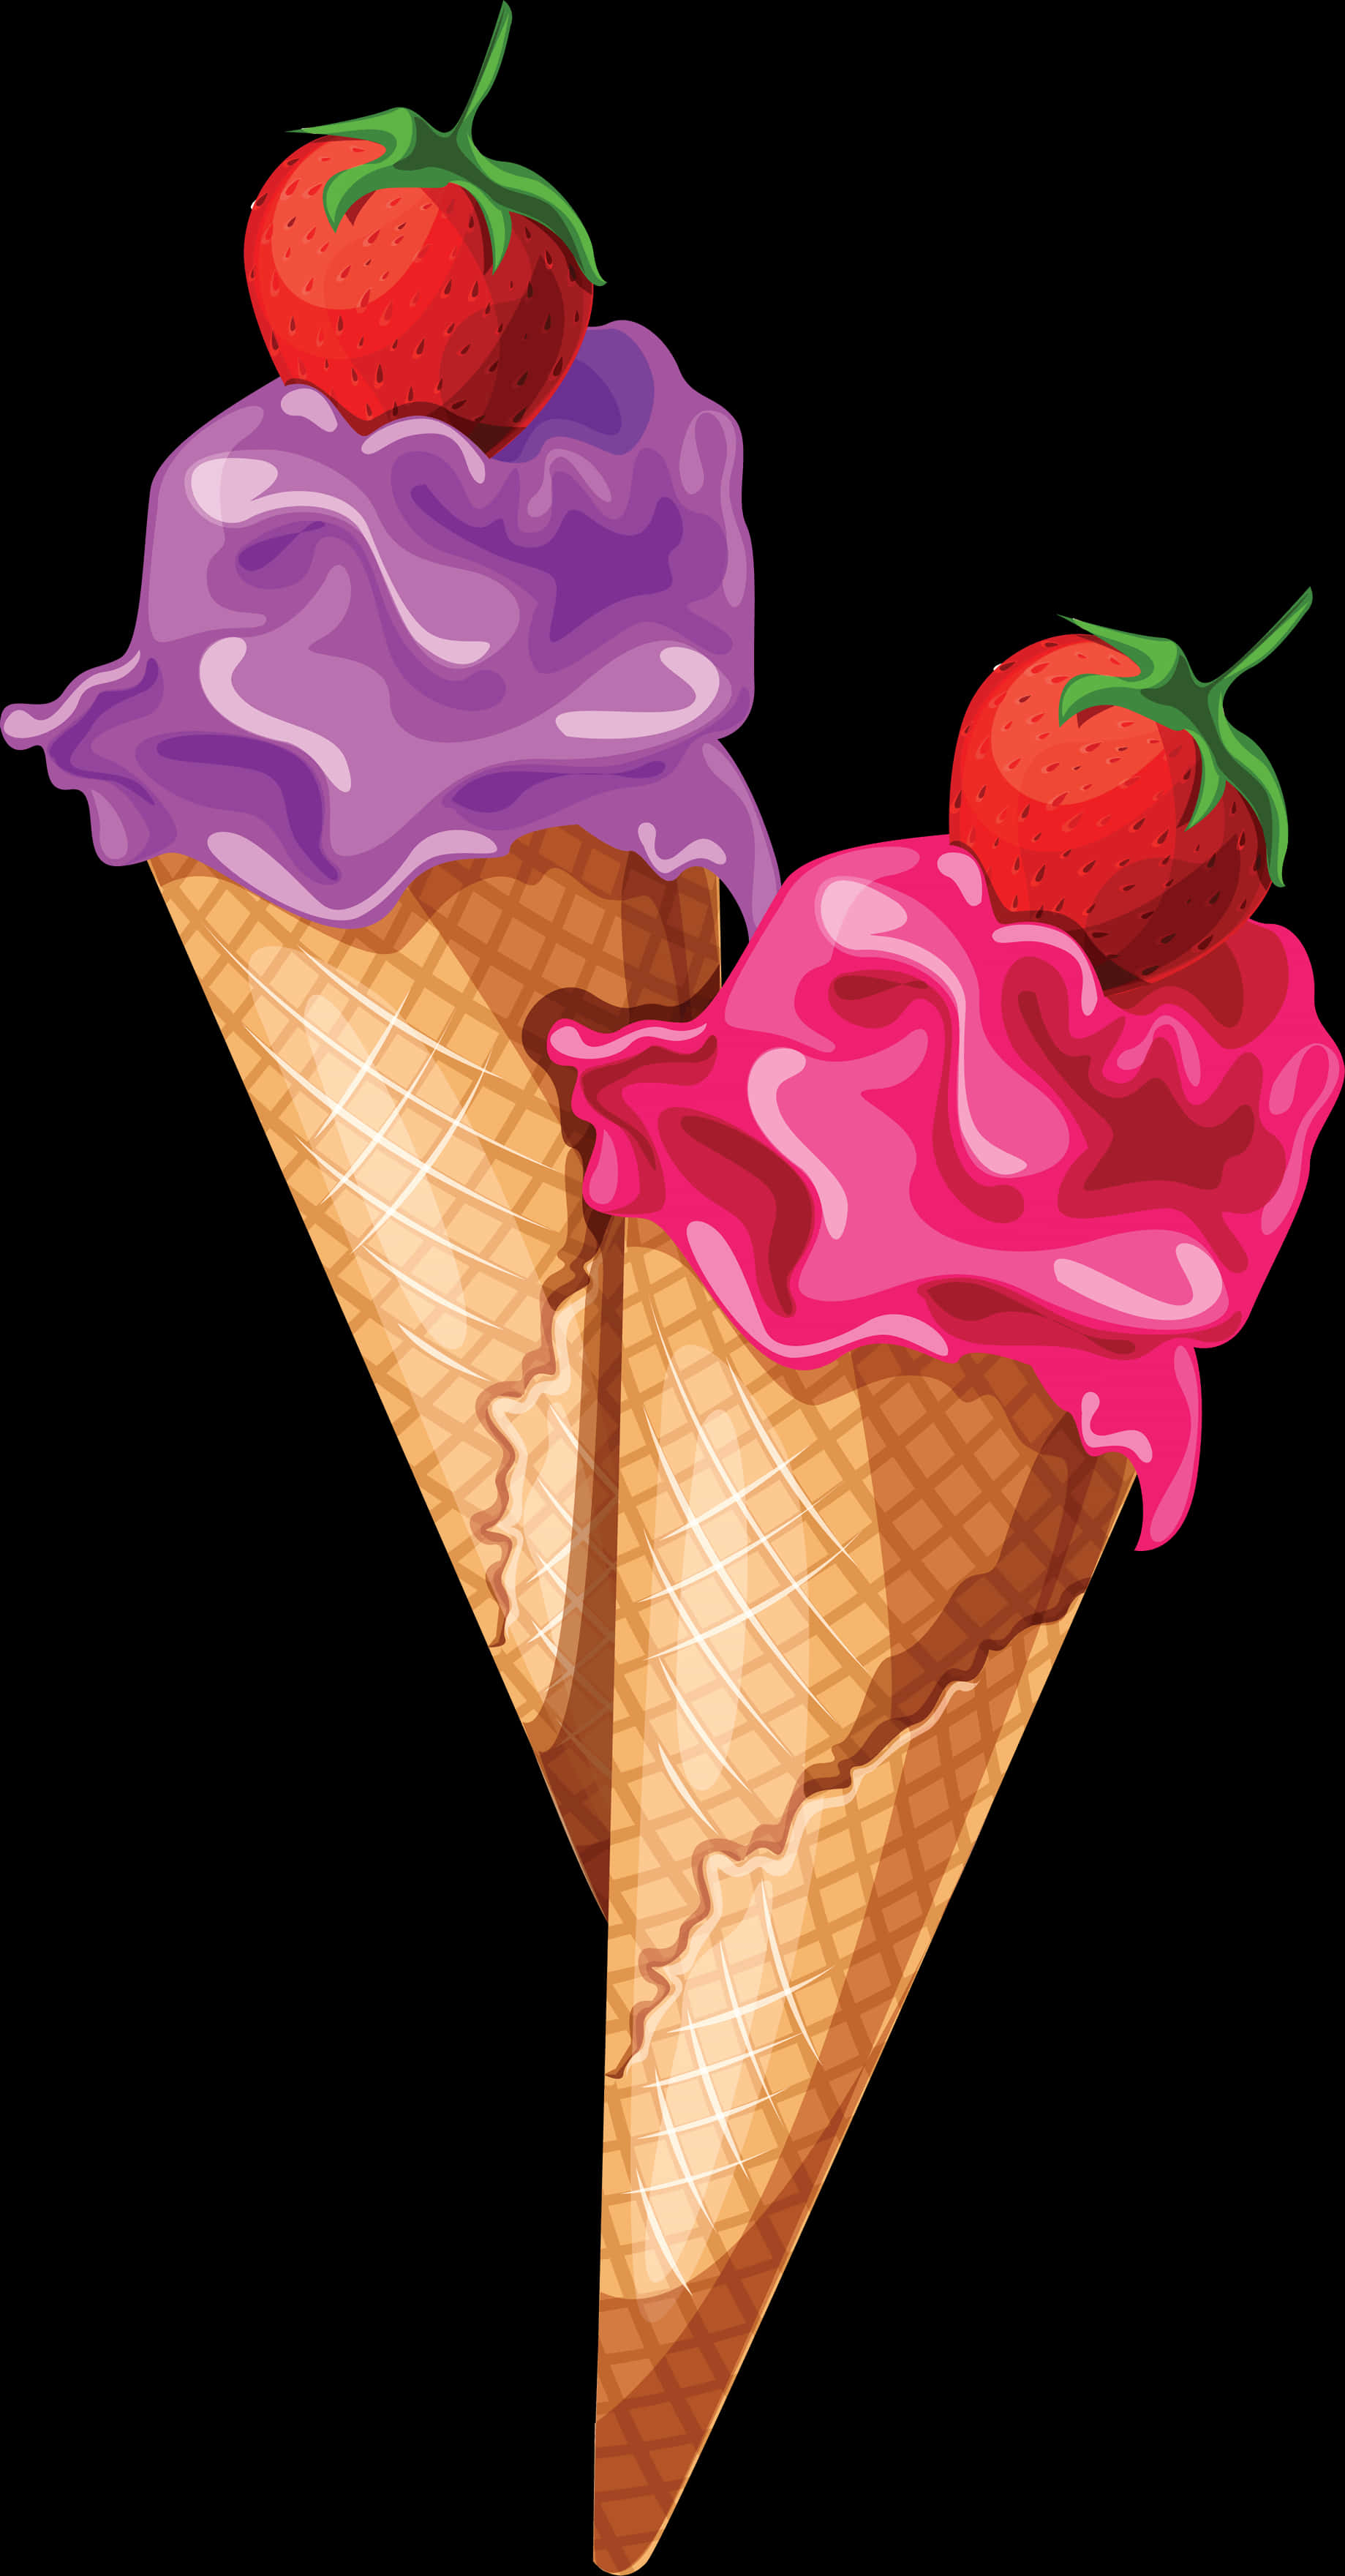 Two Ice Cream Cones With A Strawberry On Top